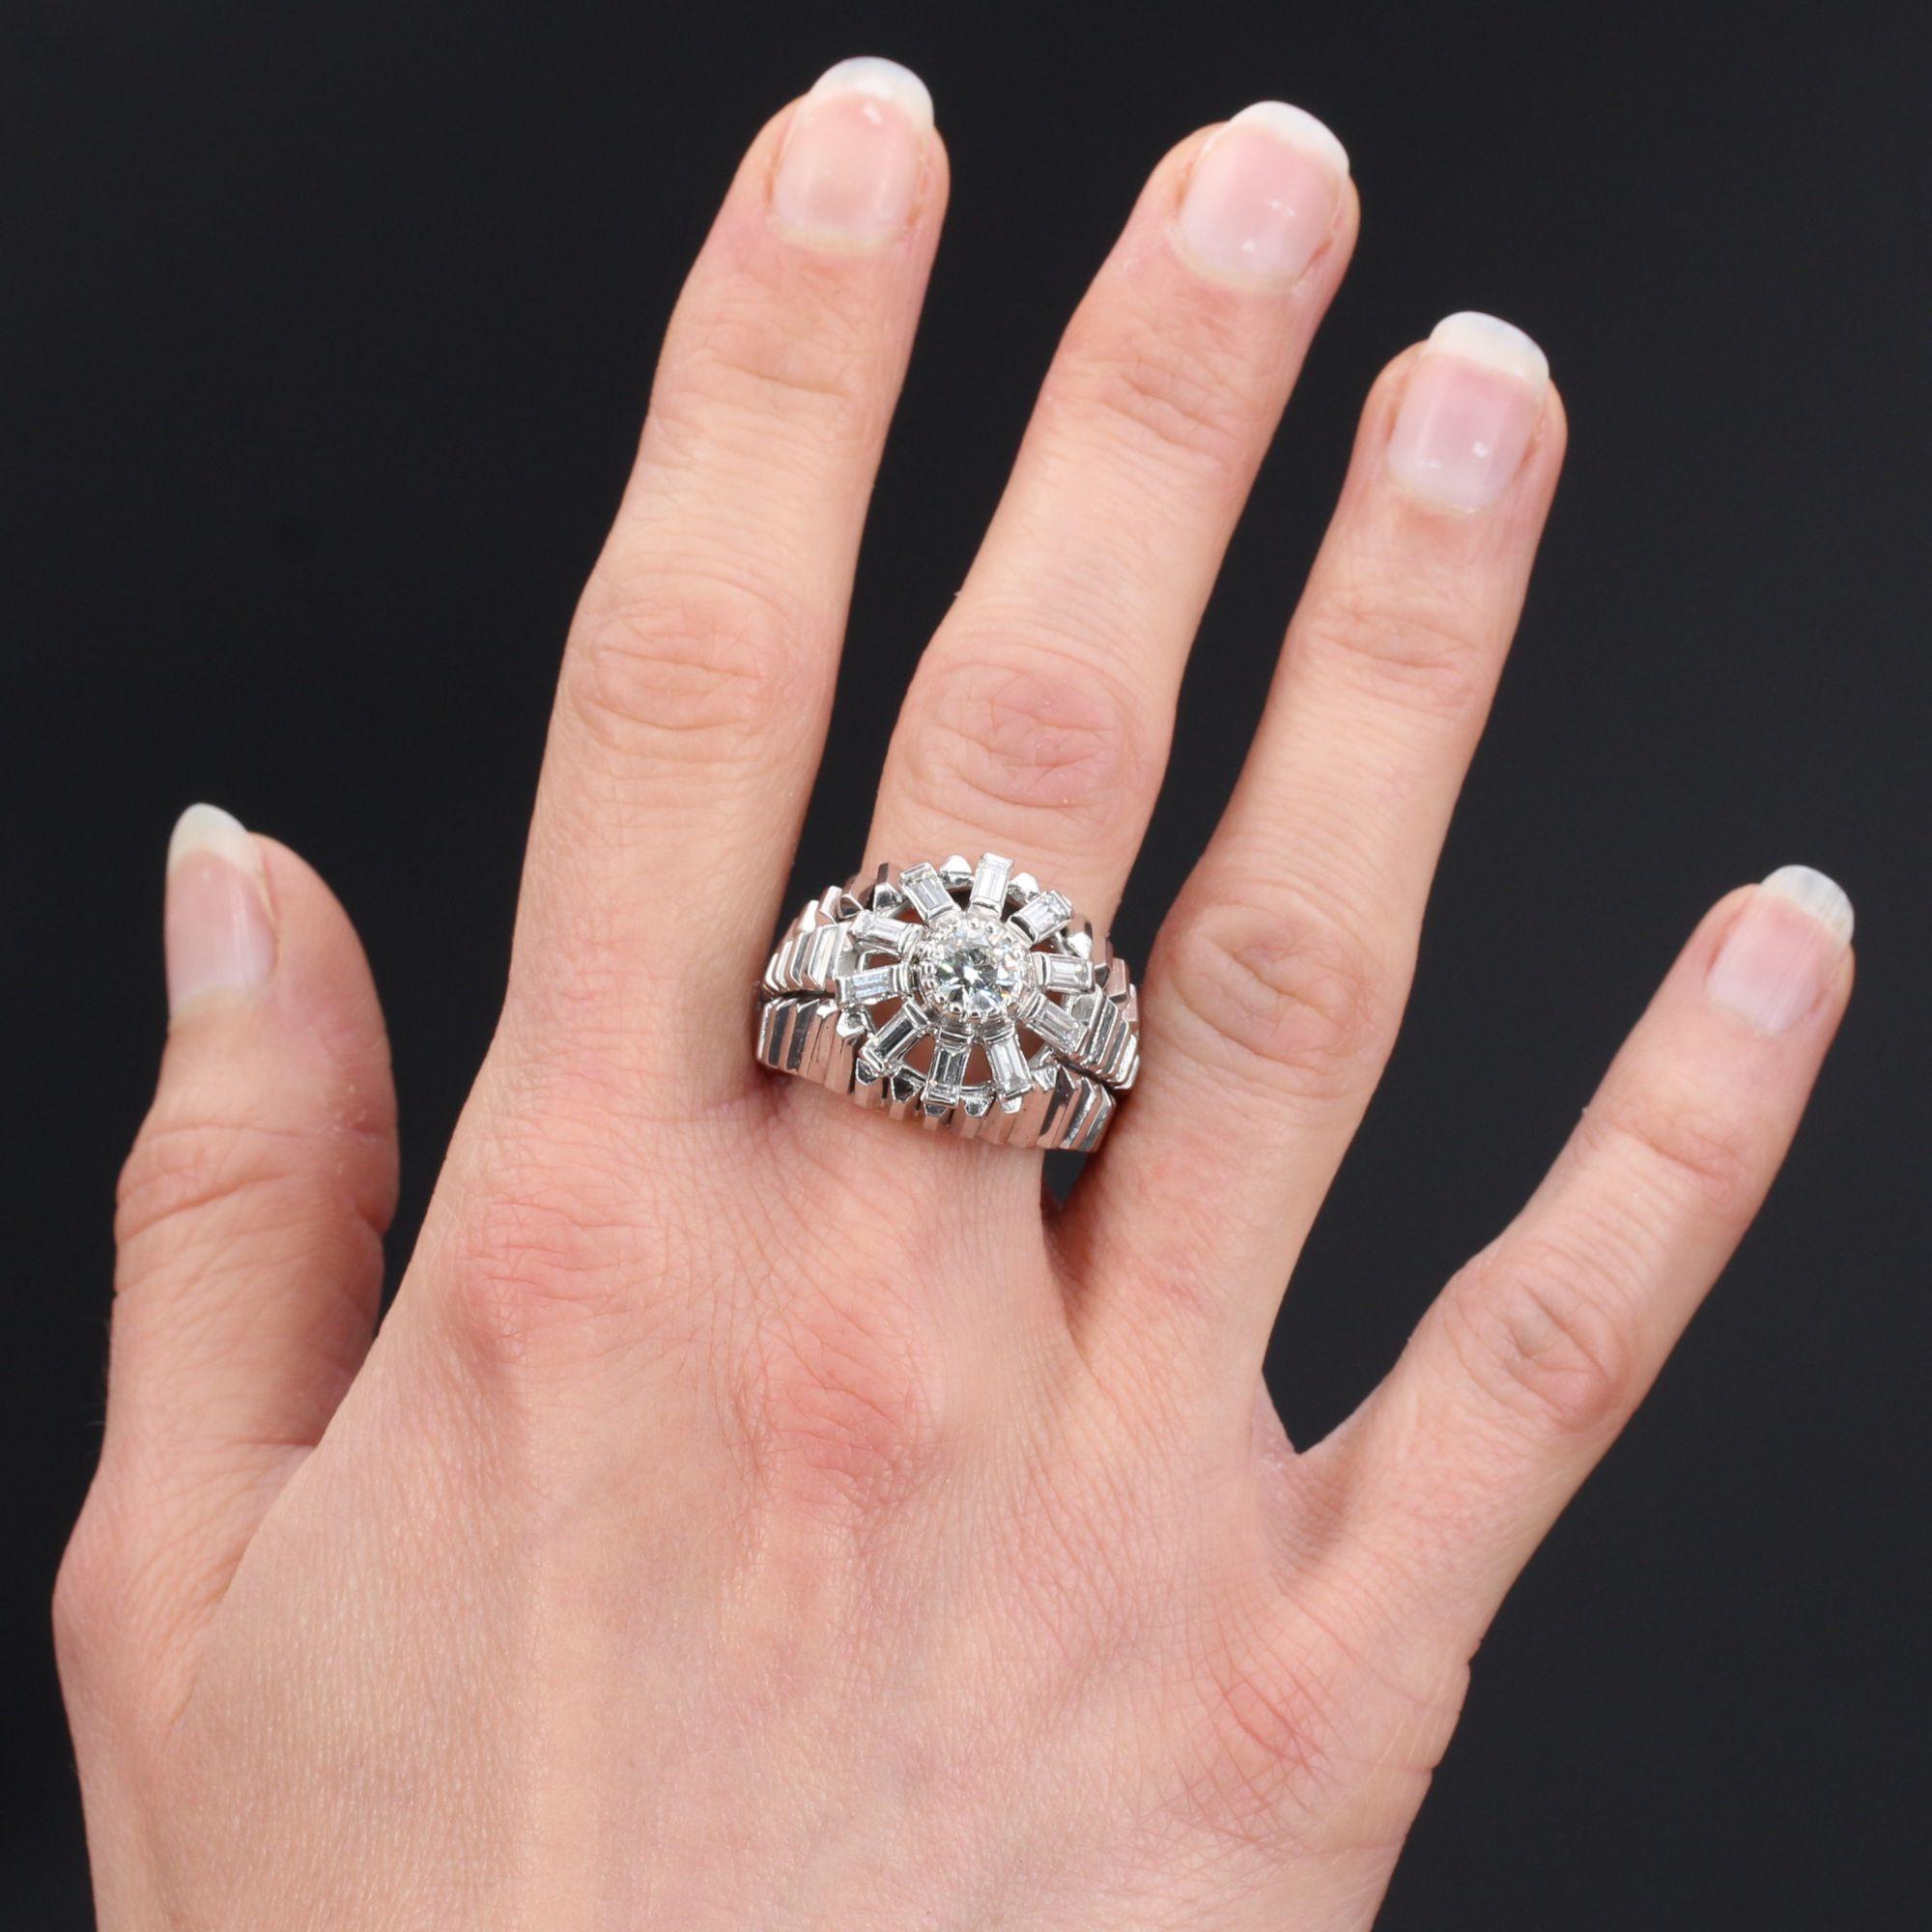 Ring in 18 karat white gold ring, owl hallmark.
An important domed ring, its setting consists of a triple row of prism motifs with openwork between them. The top of the ring is set with an antique brilliant-cut diamond in an openworked baguette-cut